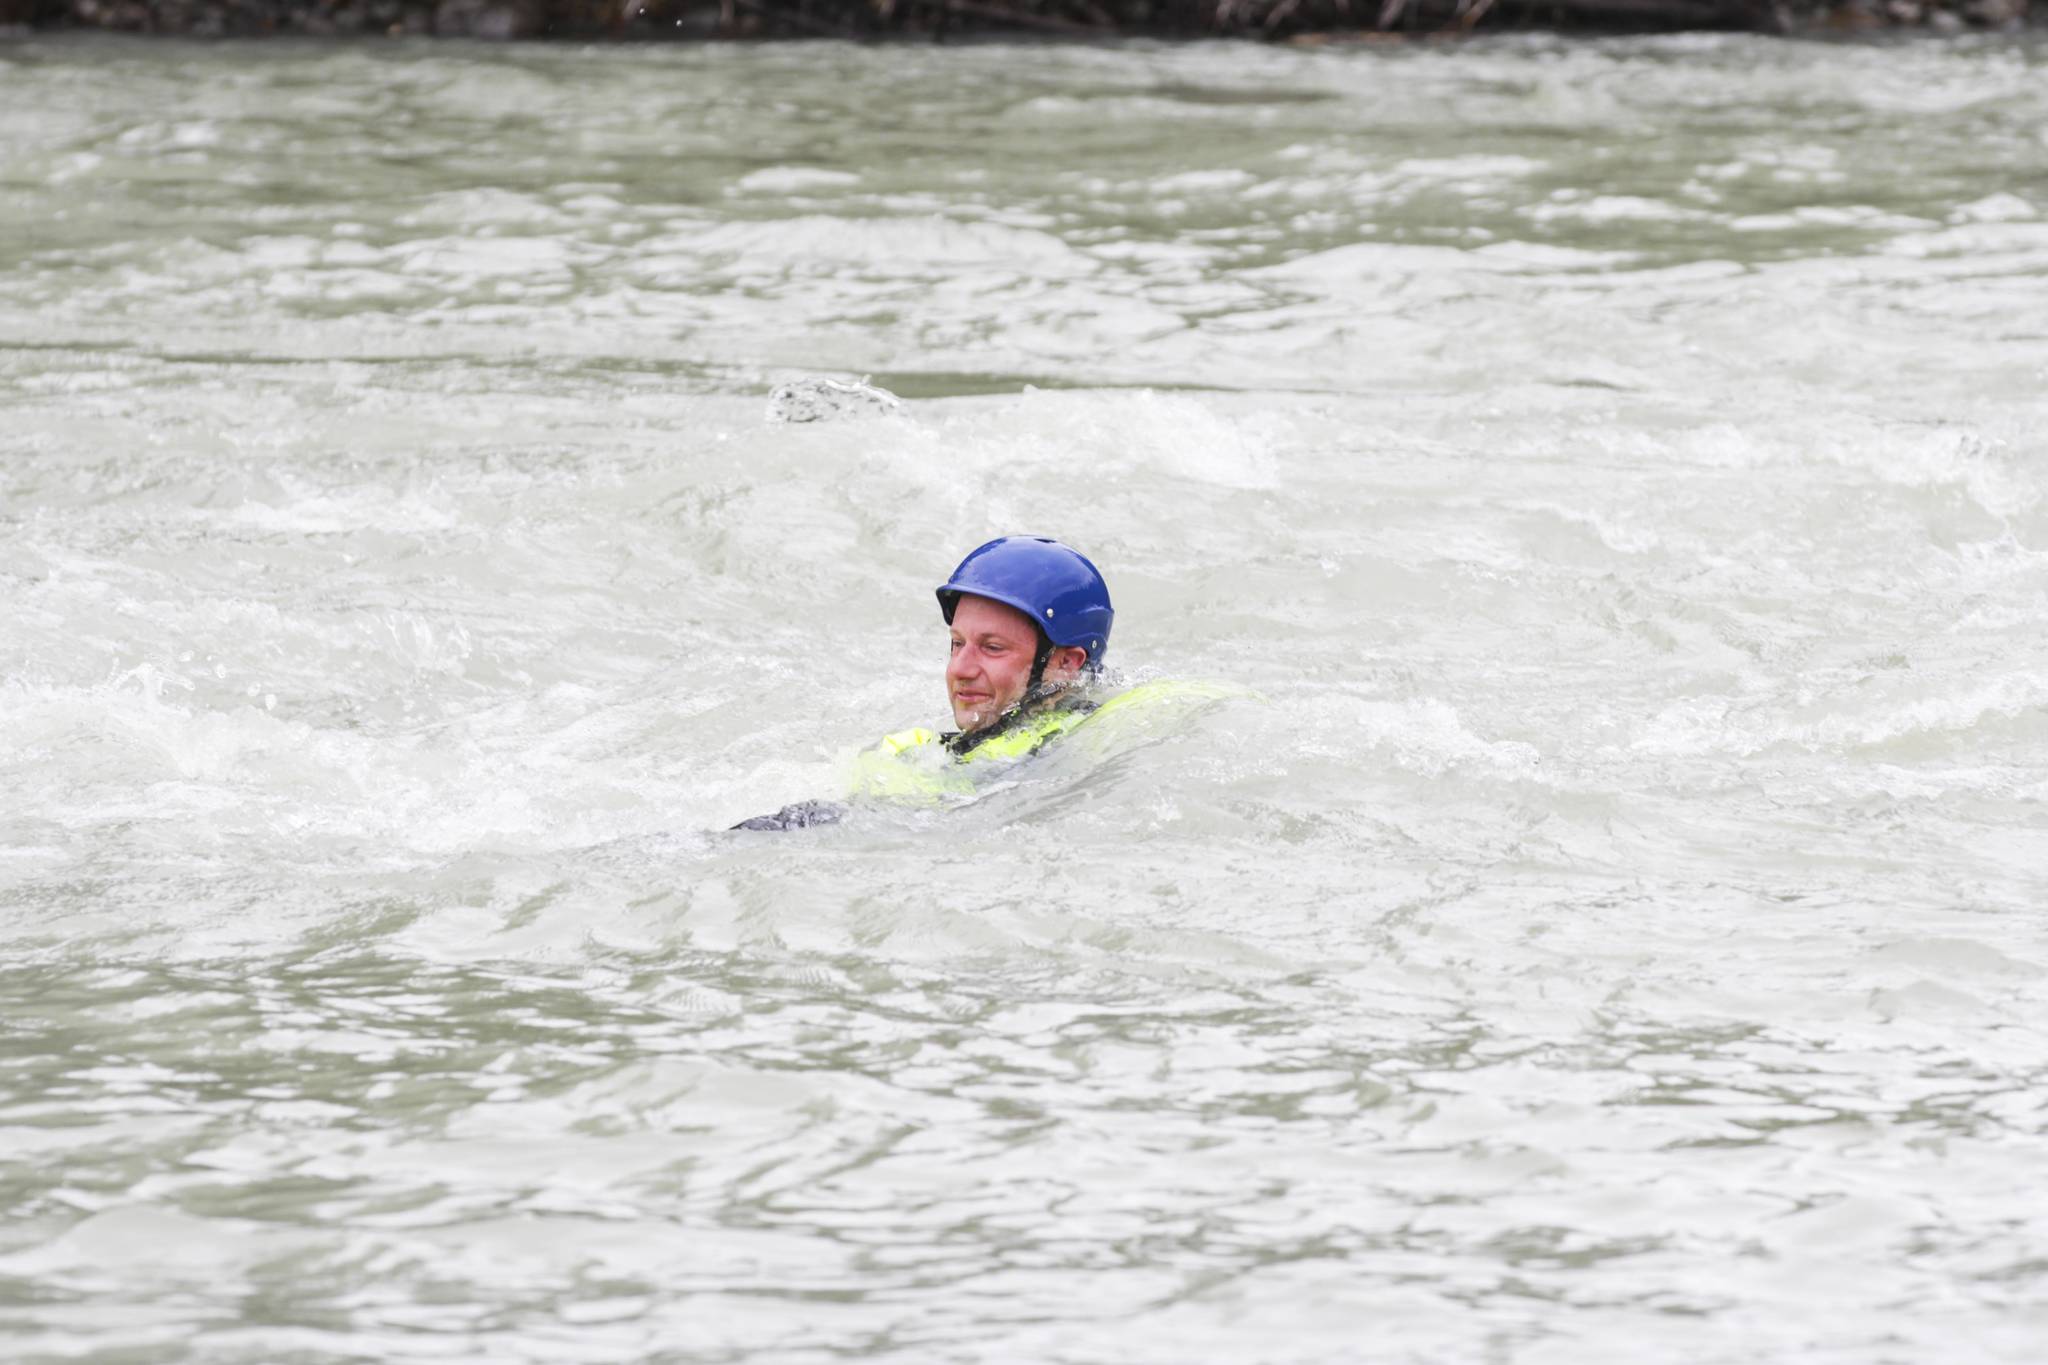 Chief Petty Officer Jeff Deronde floats downstream, simulating a victim in the water, as Capital City Fire/Rescue personnel and Coast Guardsmen practice swiftwater rescues in the Mendenhall River on as National Boating Safety Week wraps up on May 27, 2021. (Michael S. Lockett / Juneau Empire)